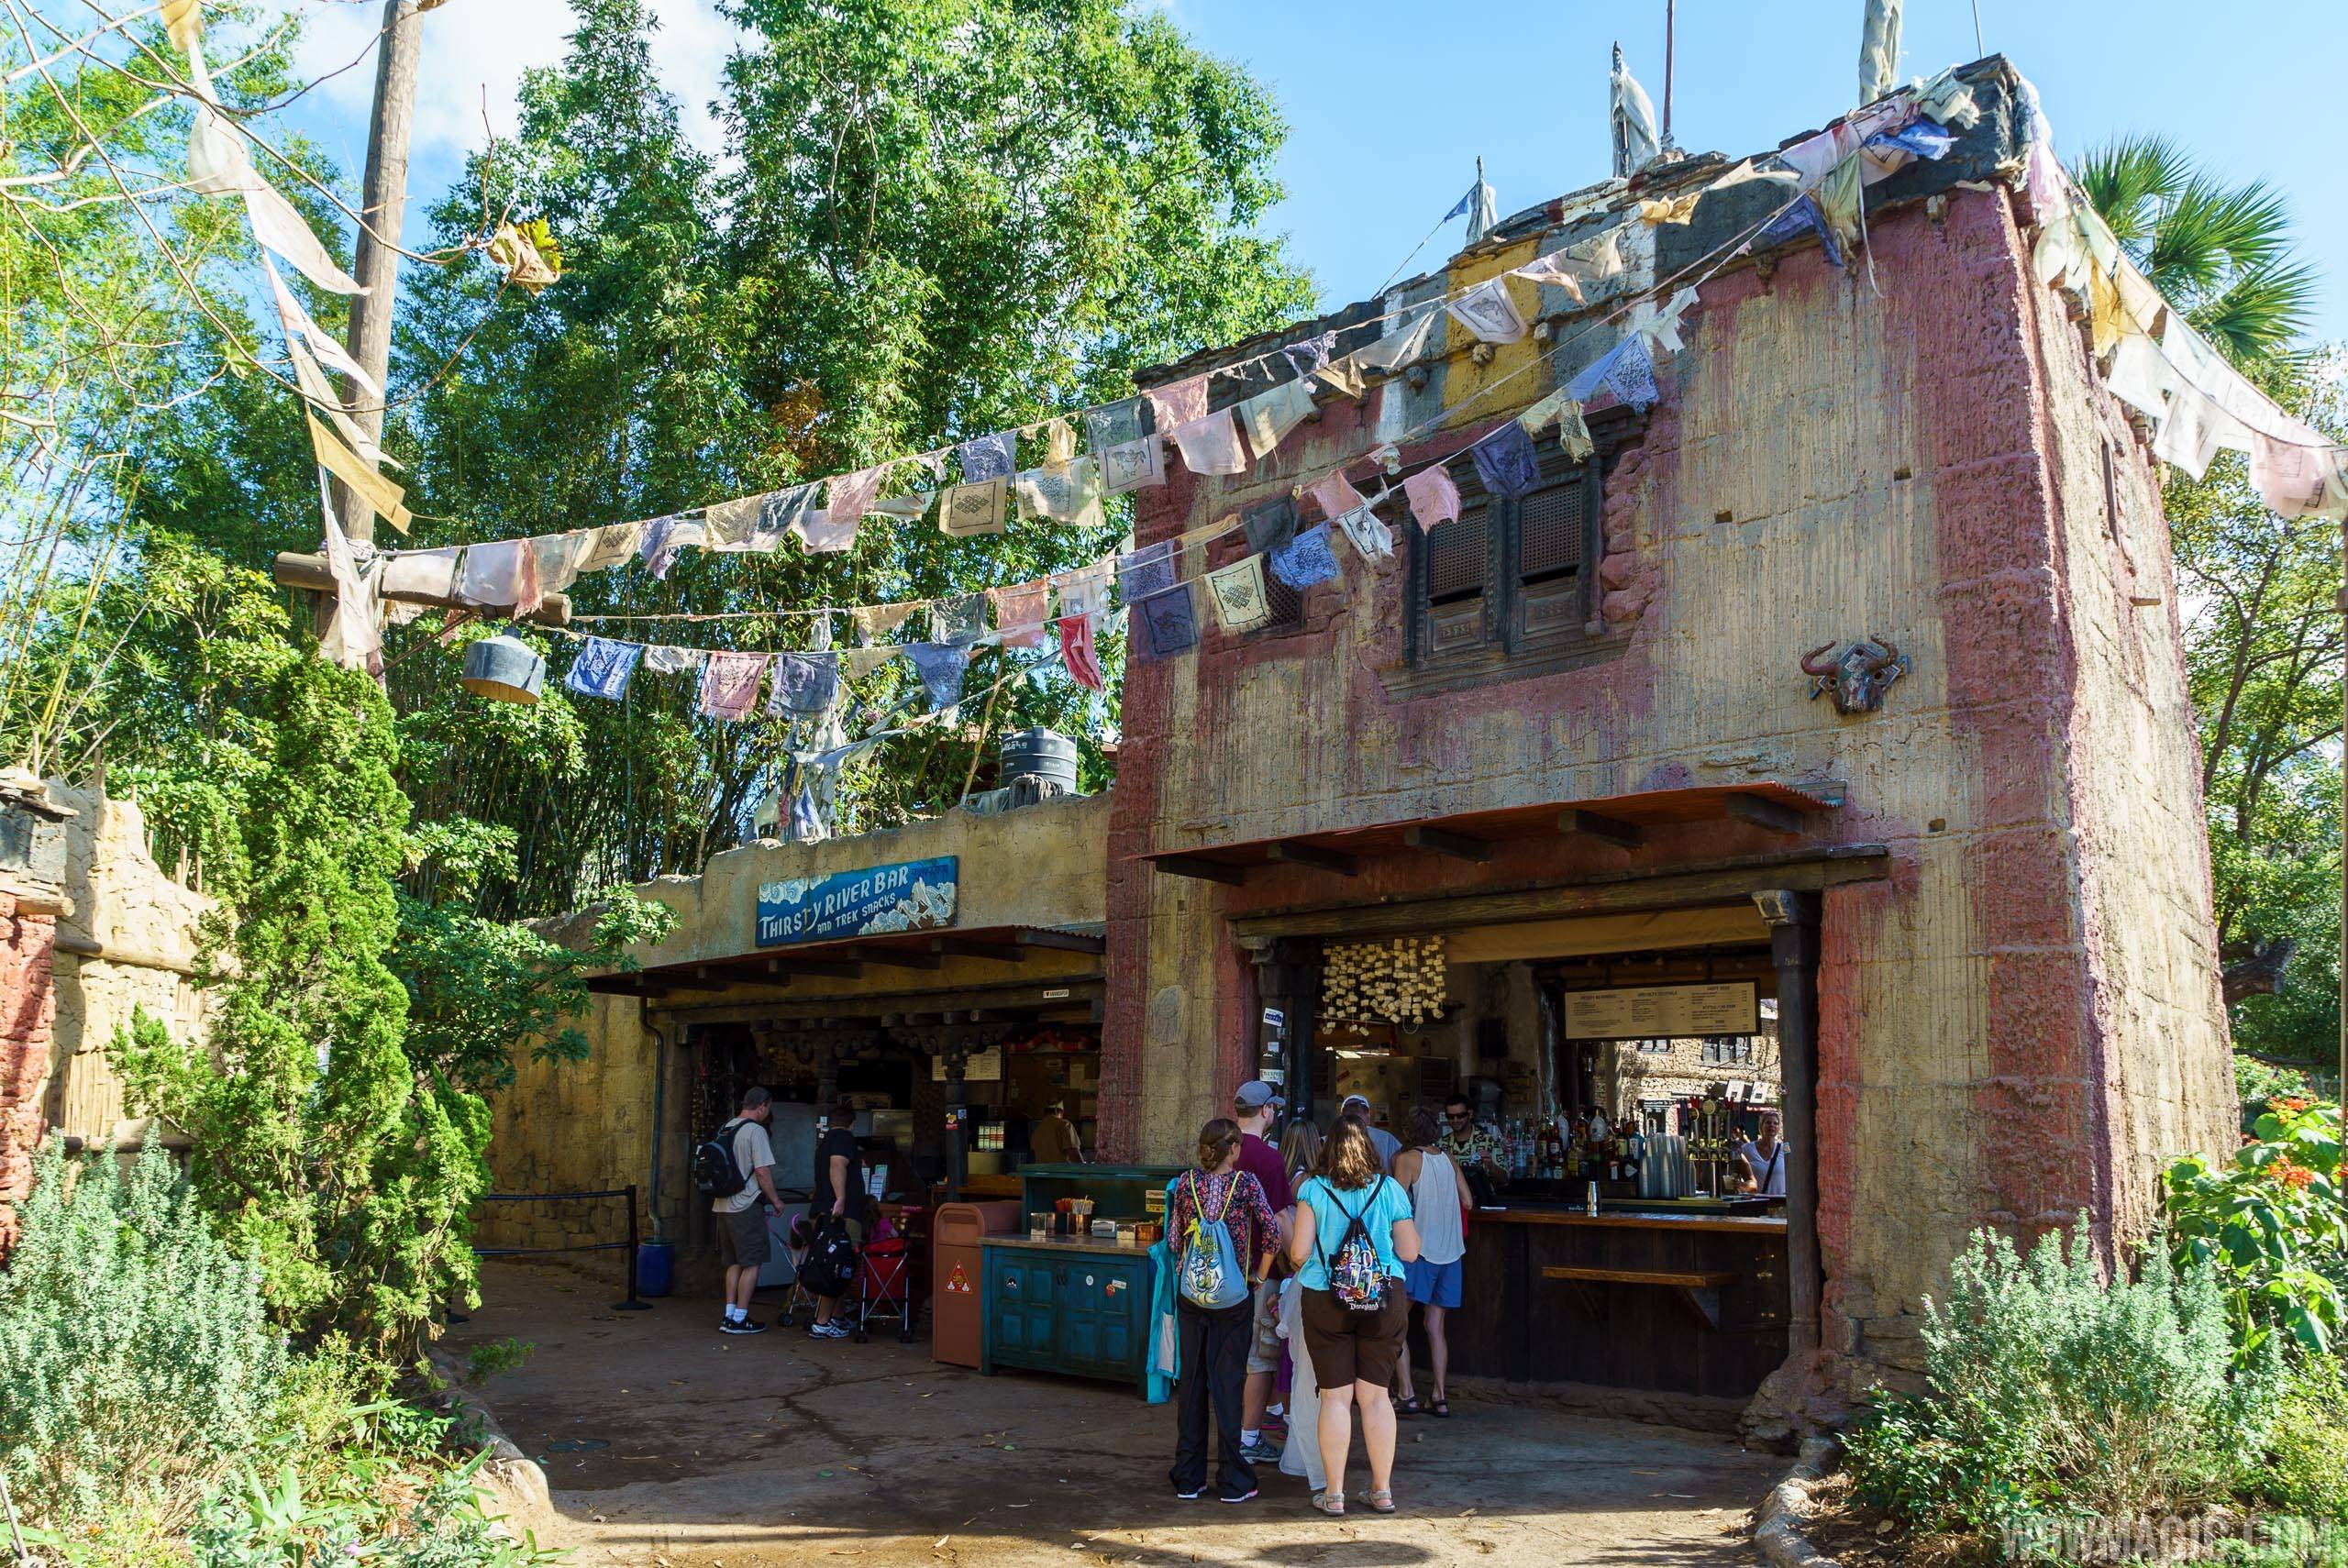 PHOTOS - Thirsty River Bar and Trek Snacks now open near Expedition Everest at Disney's Animal Kingdom